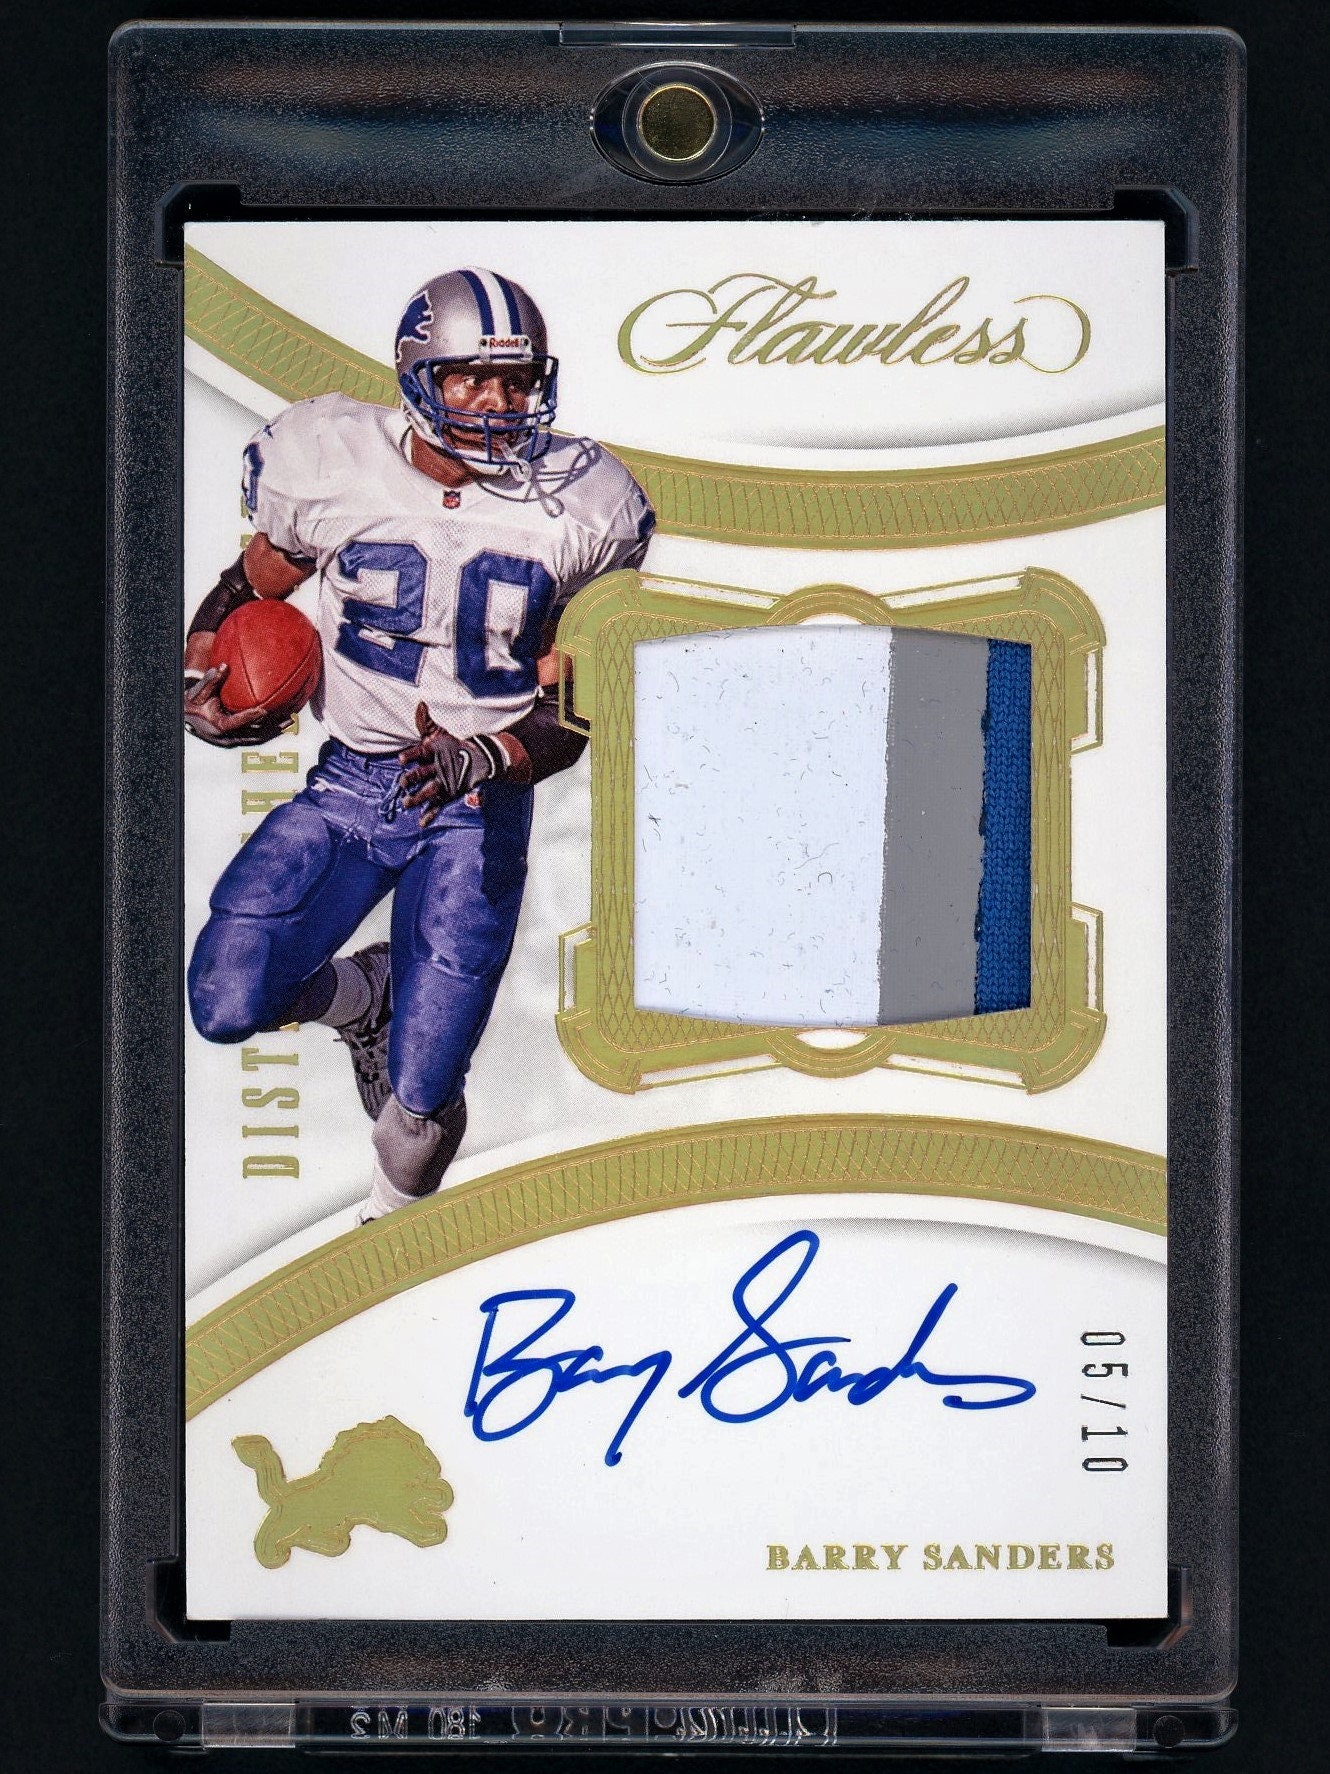 Top Barry Sanders Cards, Rookie Cards, Autographs, Inserts, Valuable